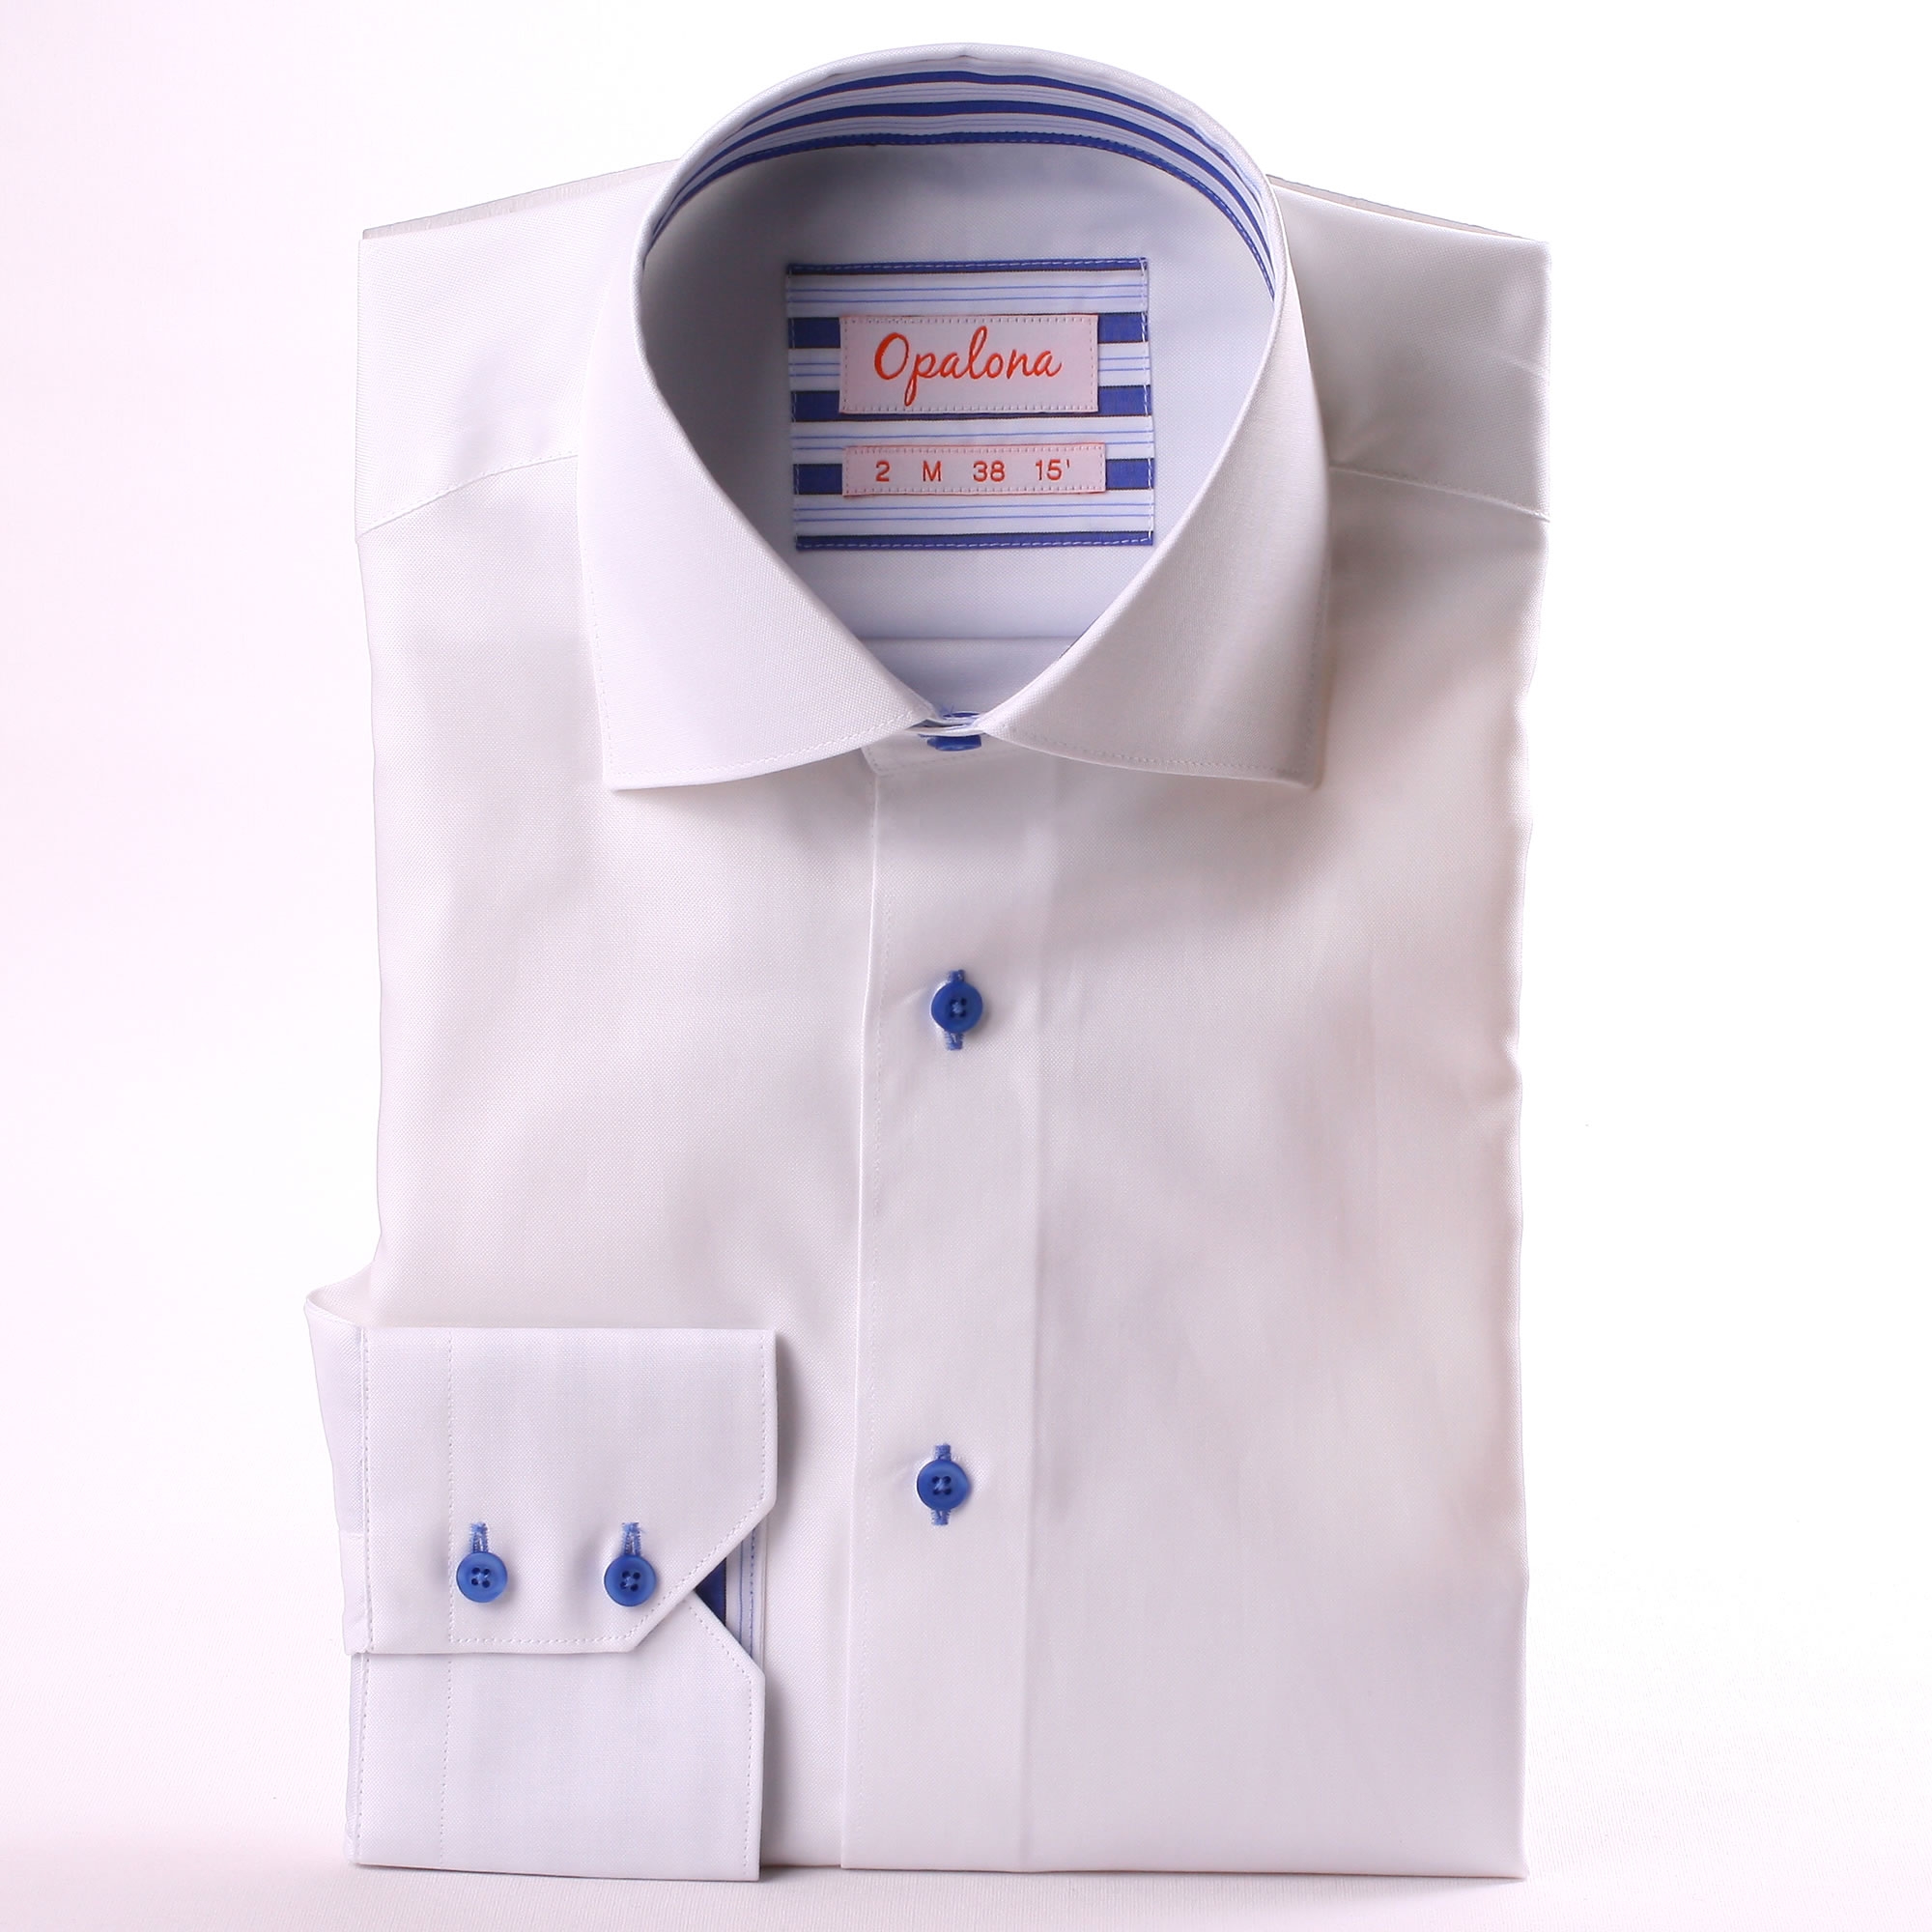 White shirt with blue and white striped collar and cuffs